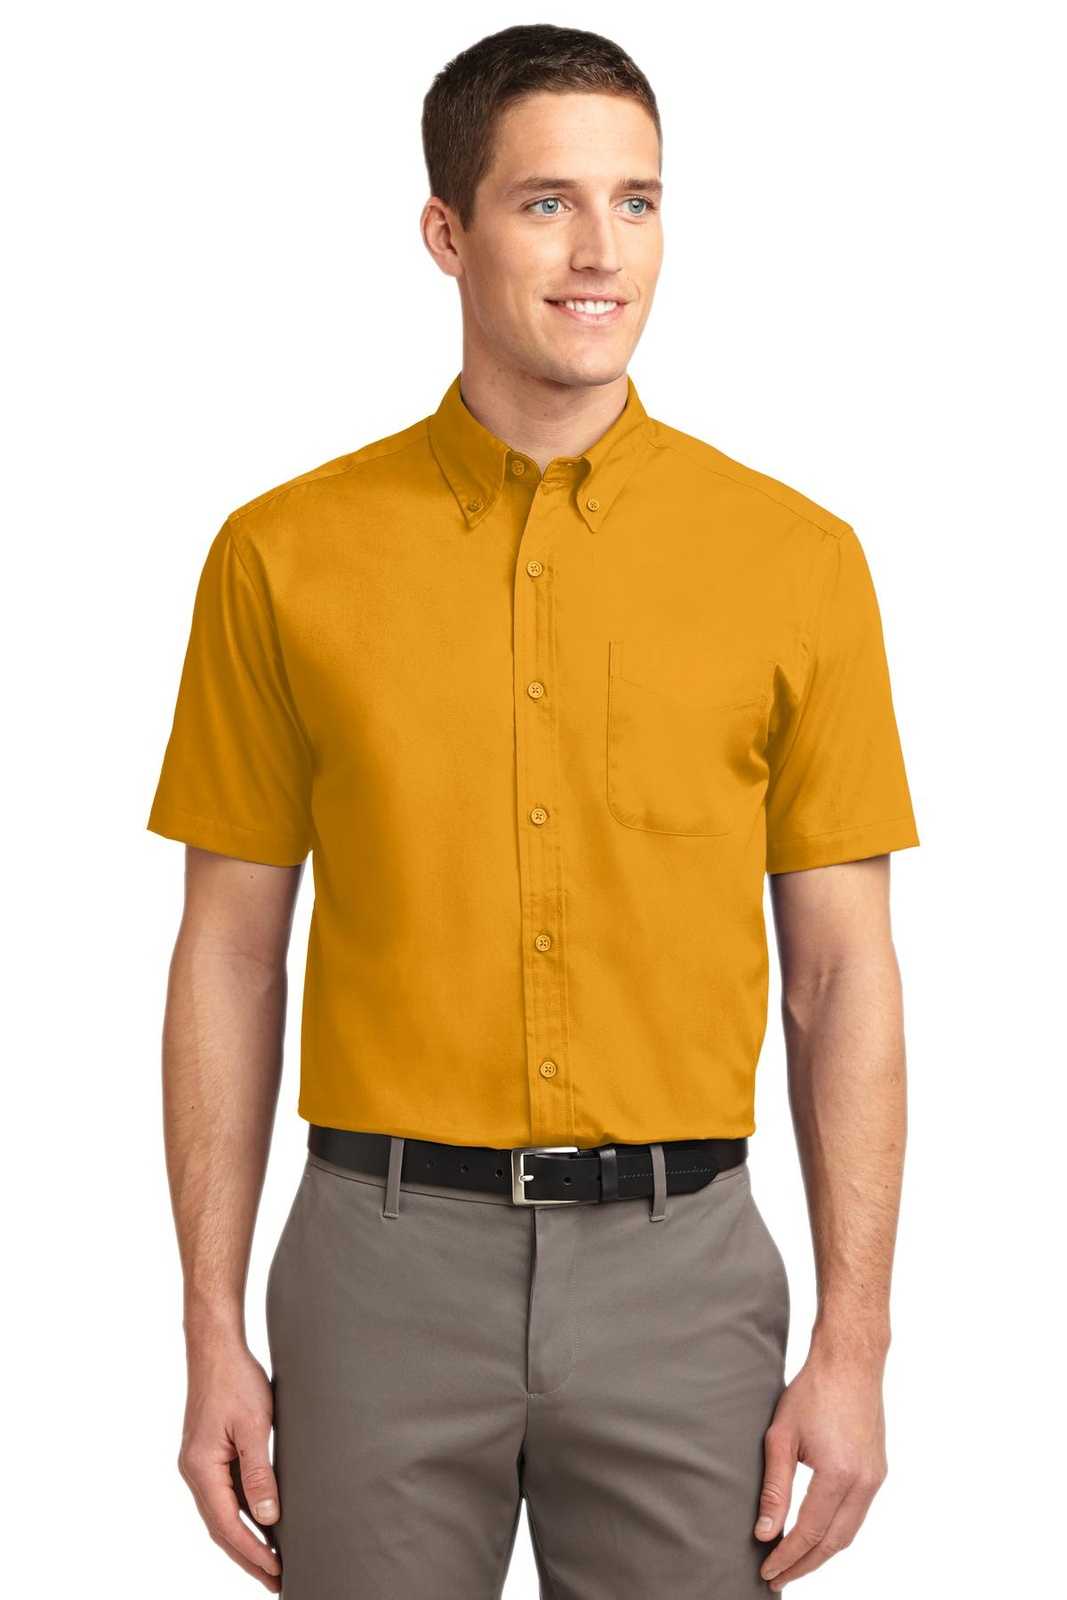 Port Authority S508 Short Sleeve Easy Care Shirt - Athletic Gold Light Stone - HIT a Double - 1